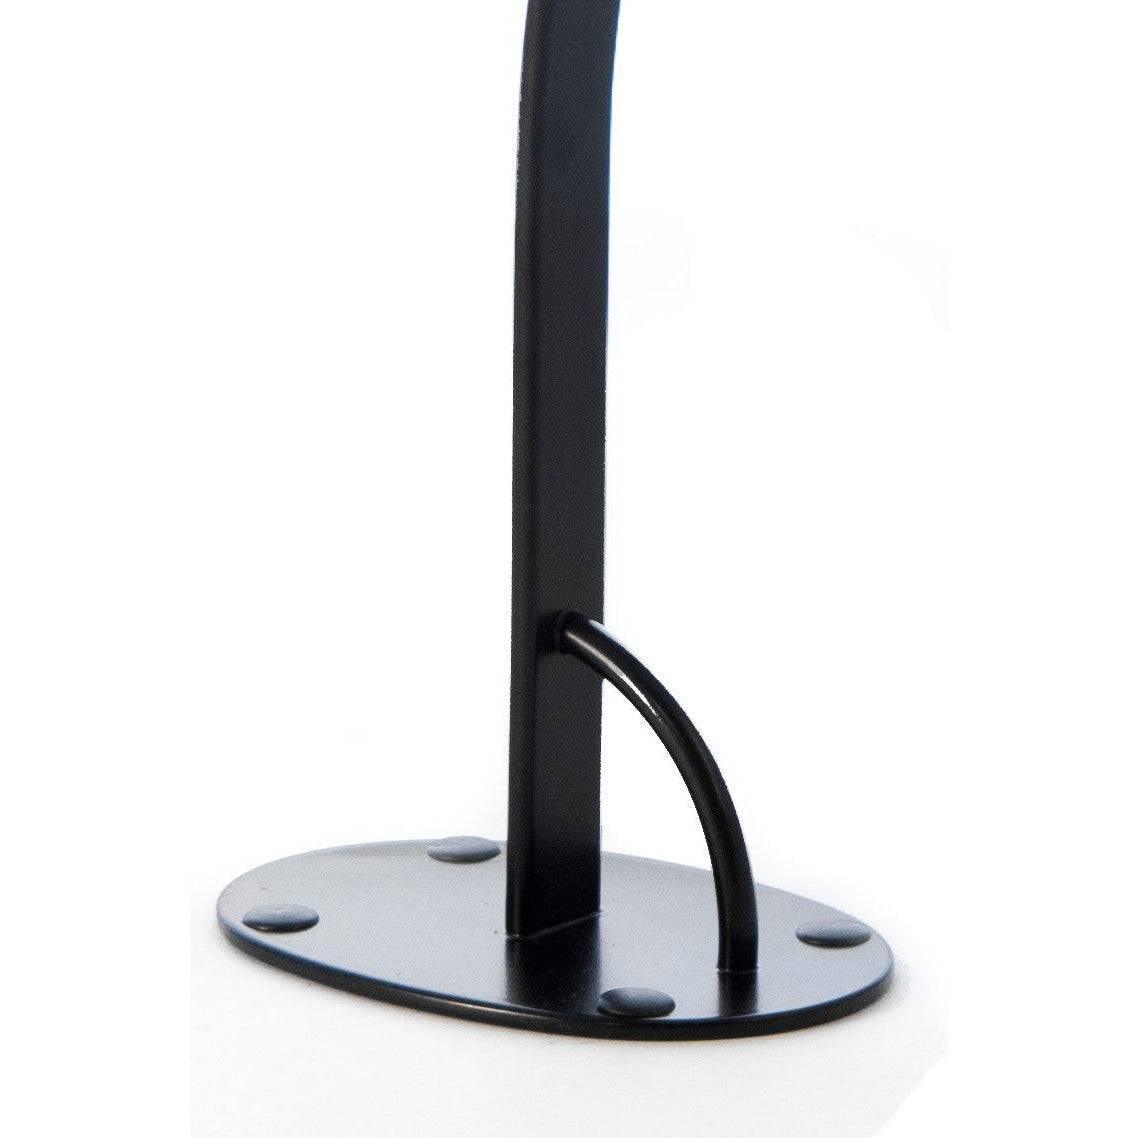 detail pic of base black desktop saxophone stand for exhibits and playing rooms by Locoparasaxo 